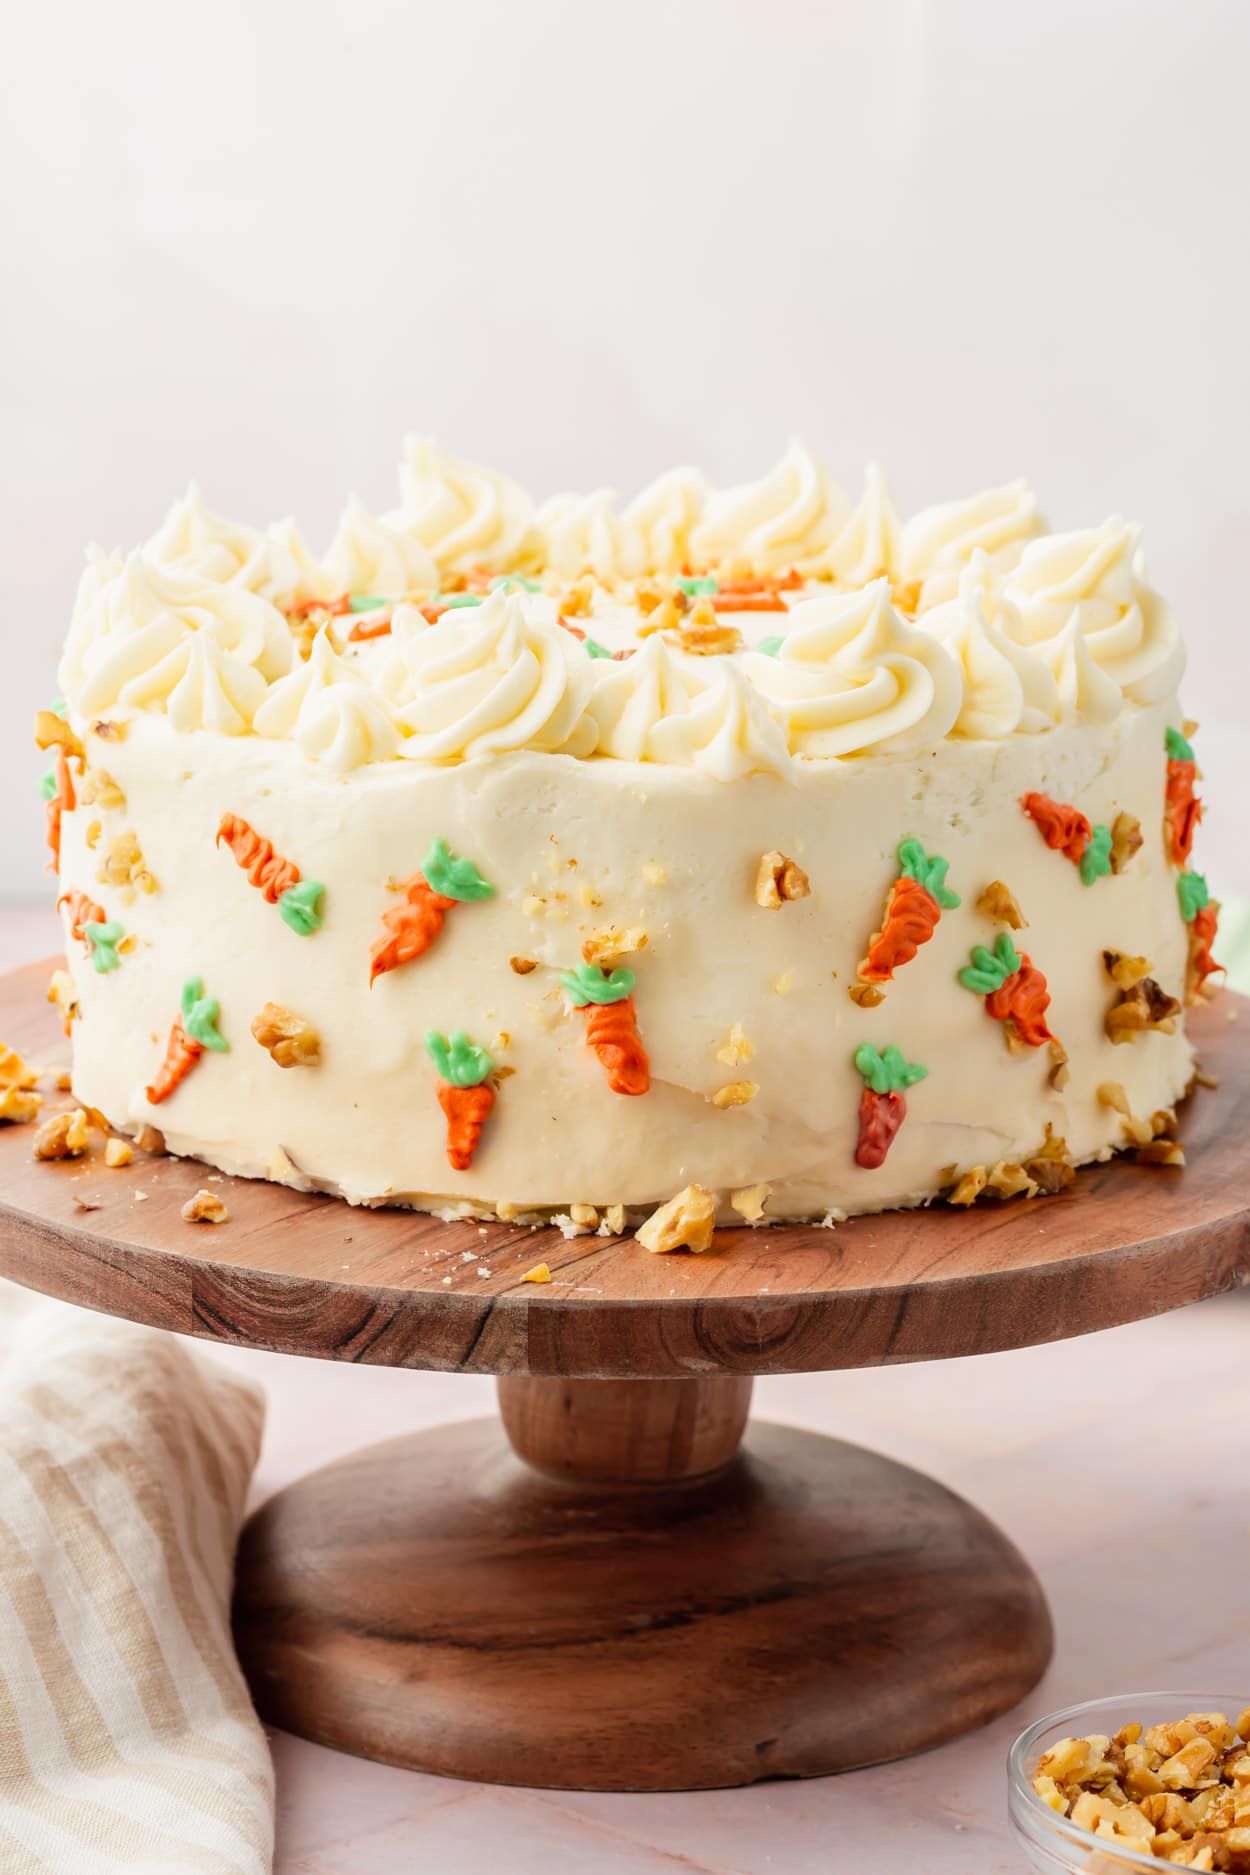 A straight on view of a cake frosted with cream cheese frosting and decorated carrots on a wood cake stand.